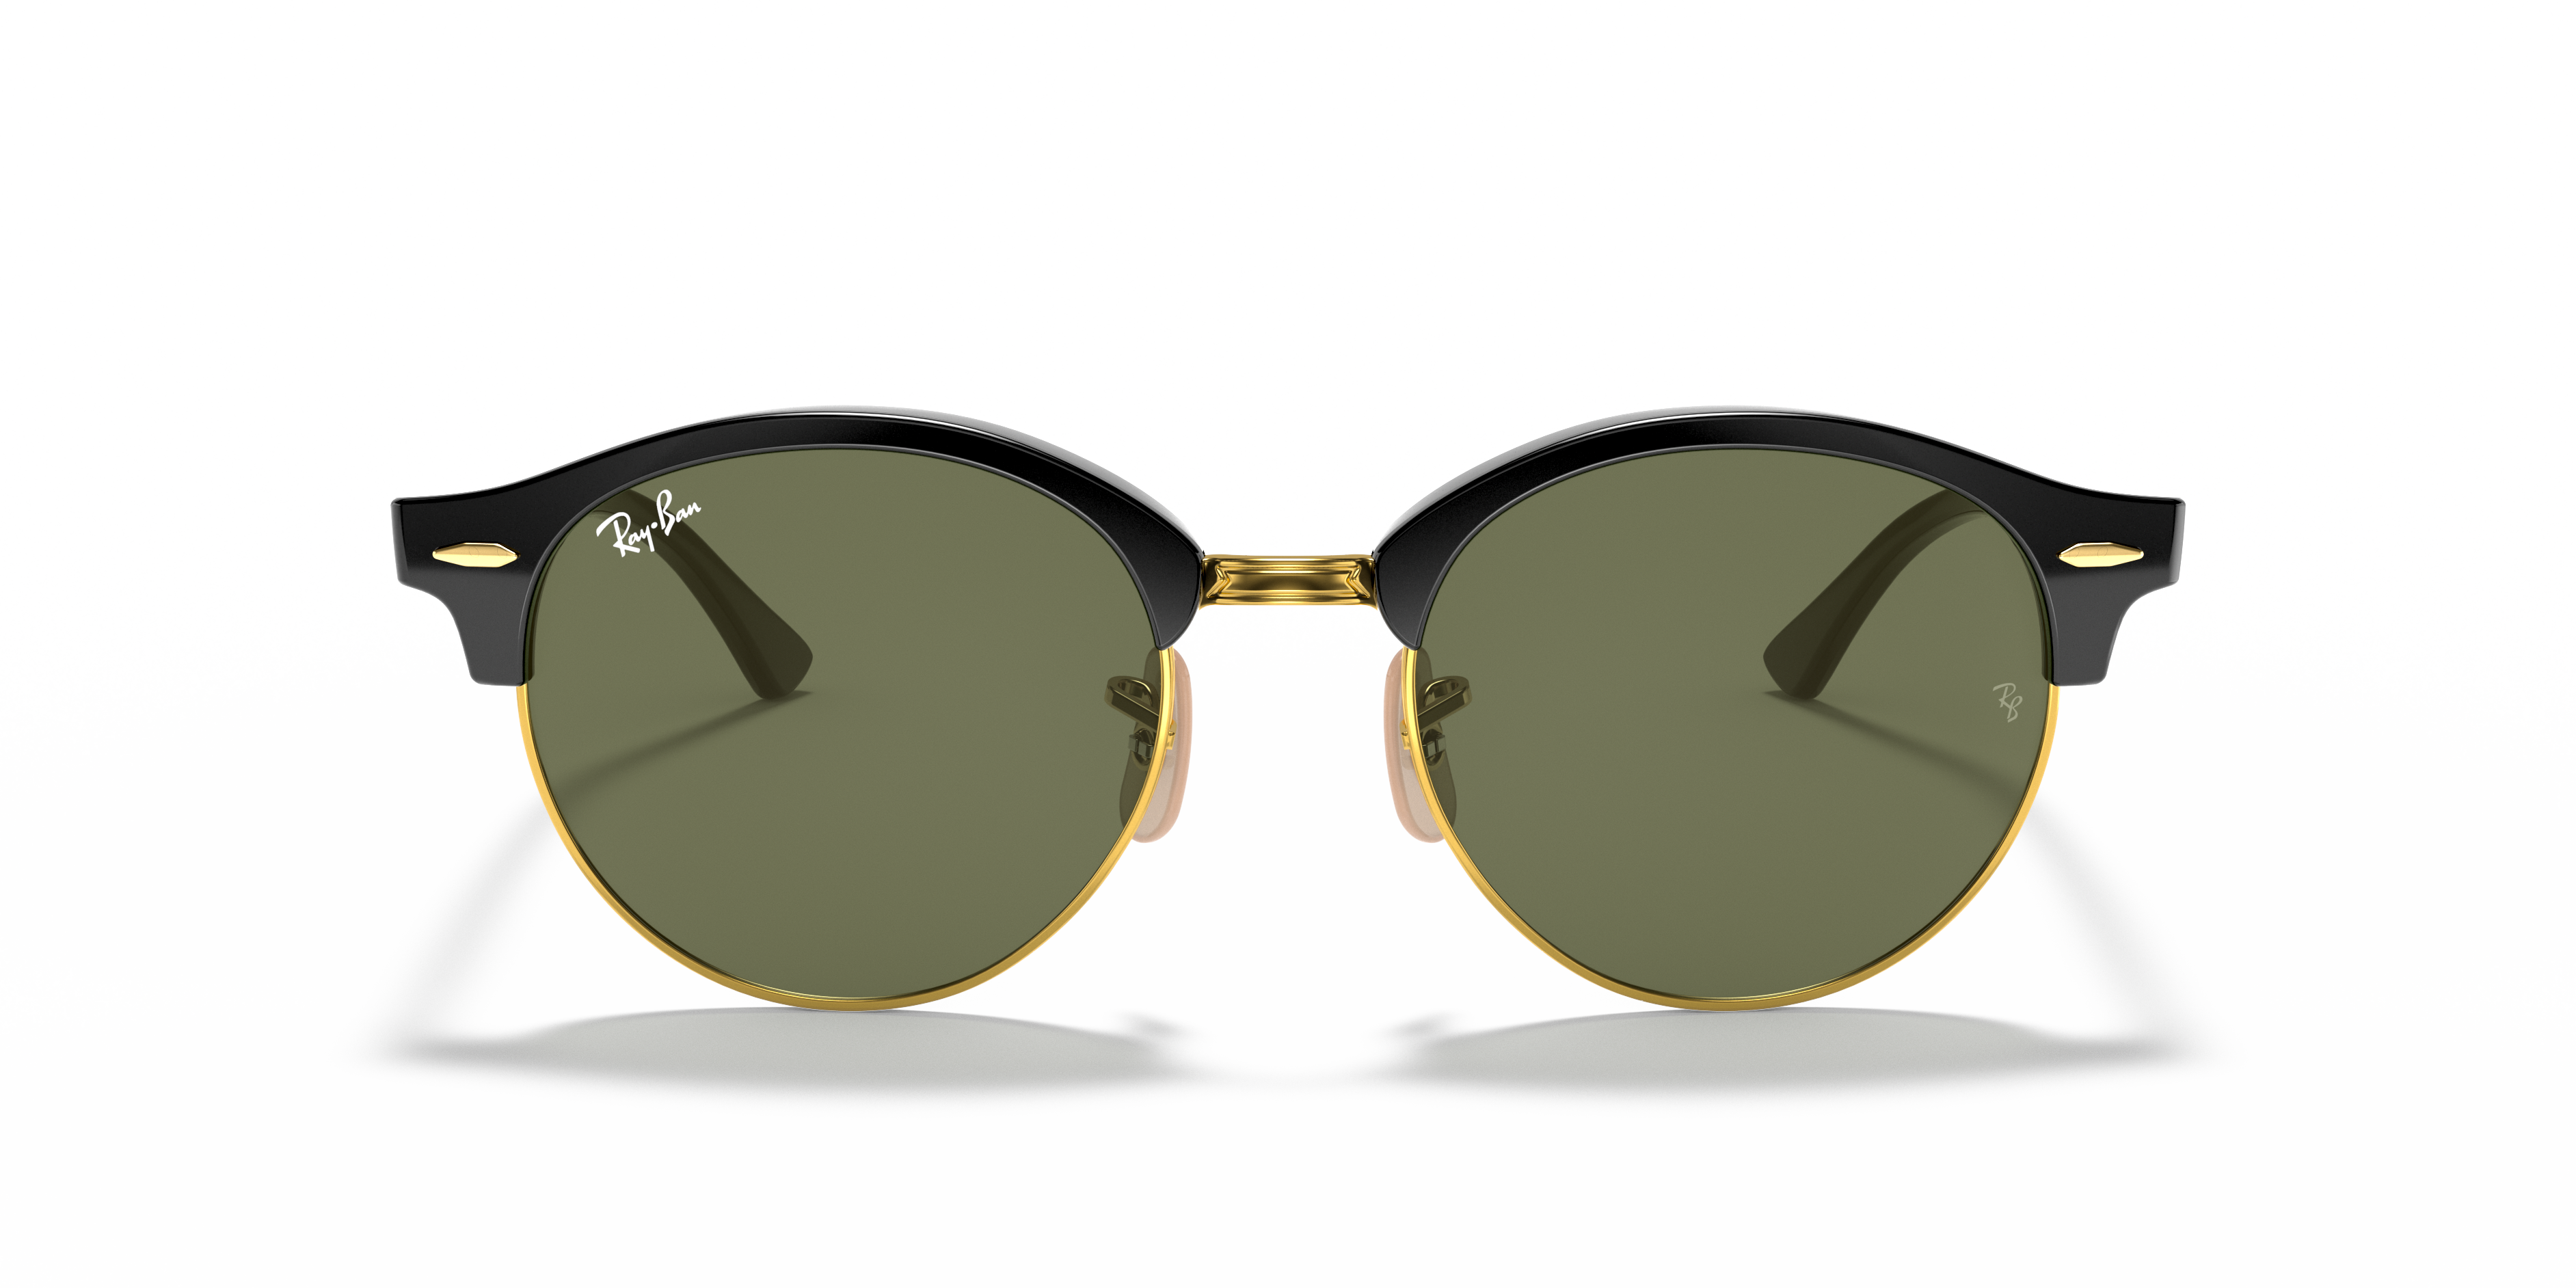 CLUBROUND CLASSIC Sunglasses in Black and Green | Ray-Ban®